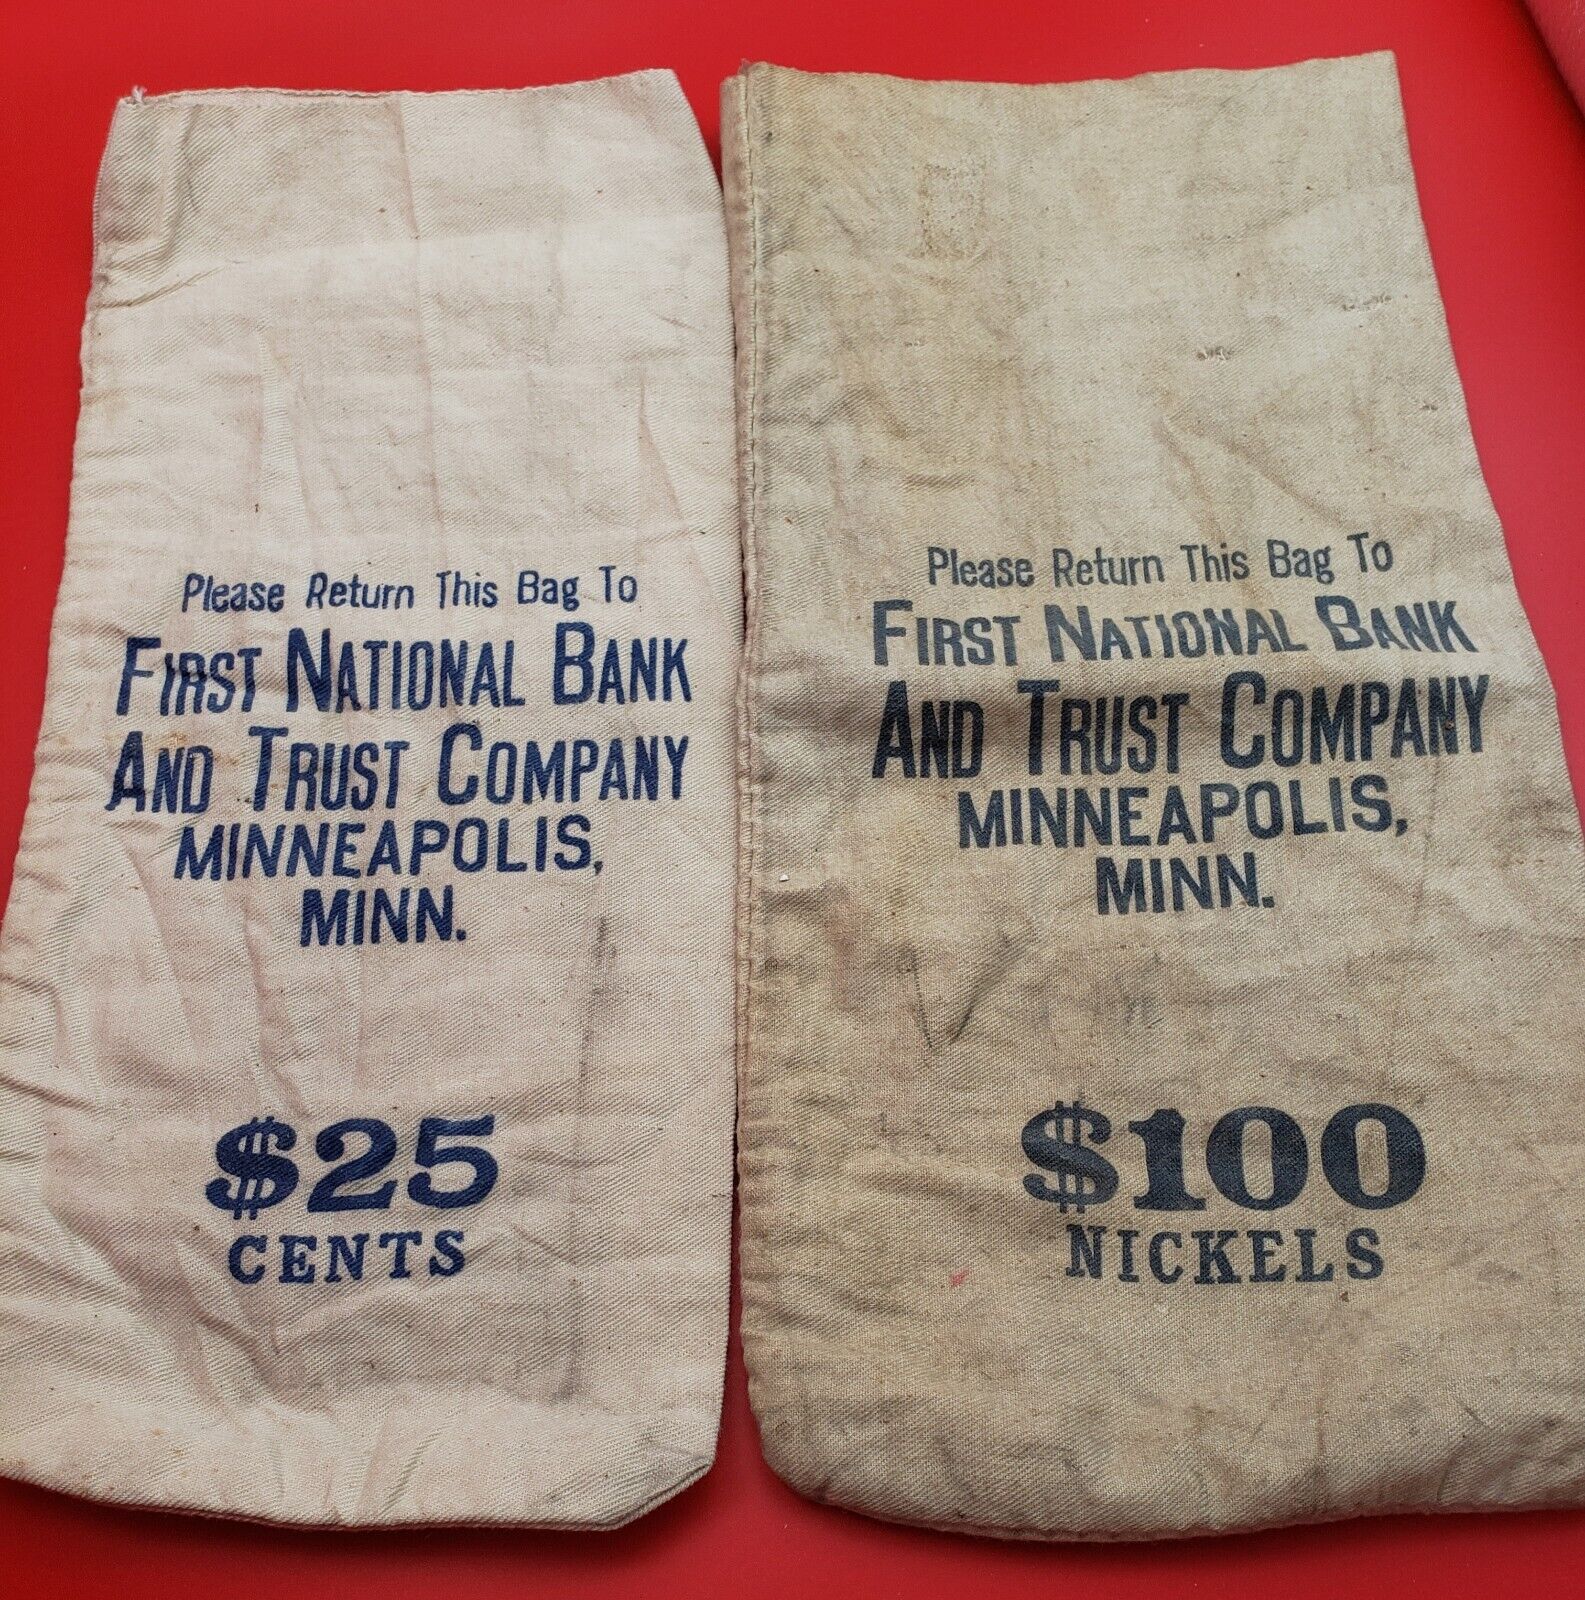 RARE OLD INTACT FIRST NATIONAL BANK AND TRUST COMPANY $25 CENTS $100 NICKEL BAGS